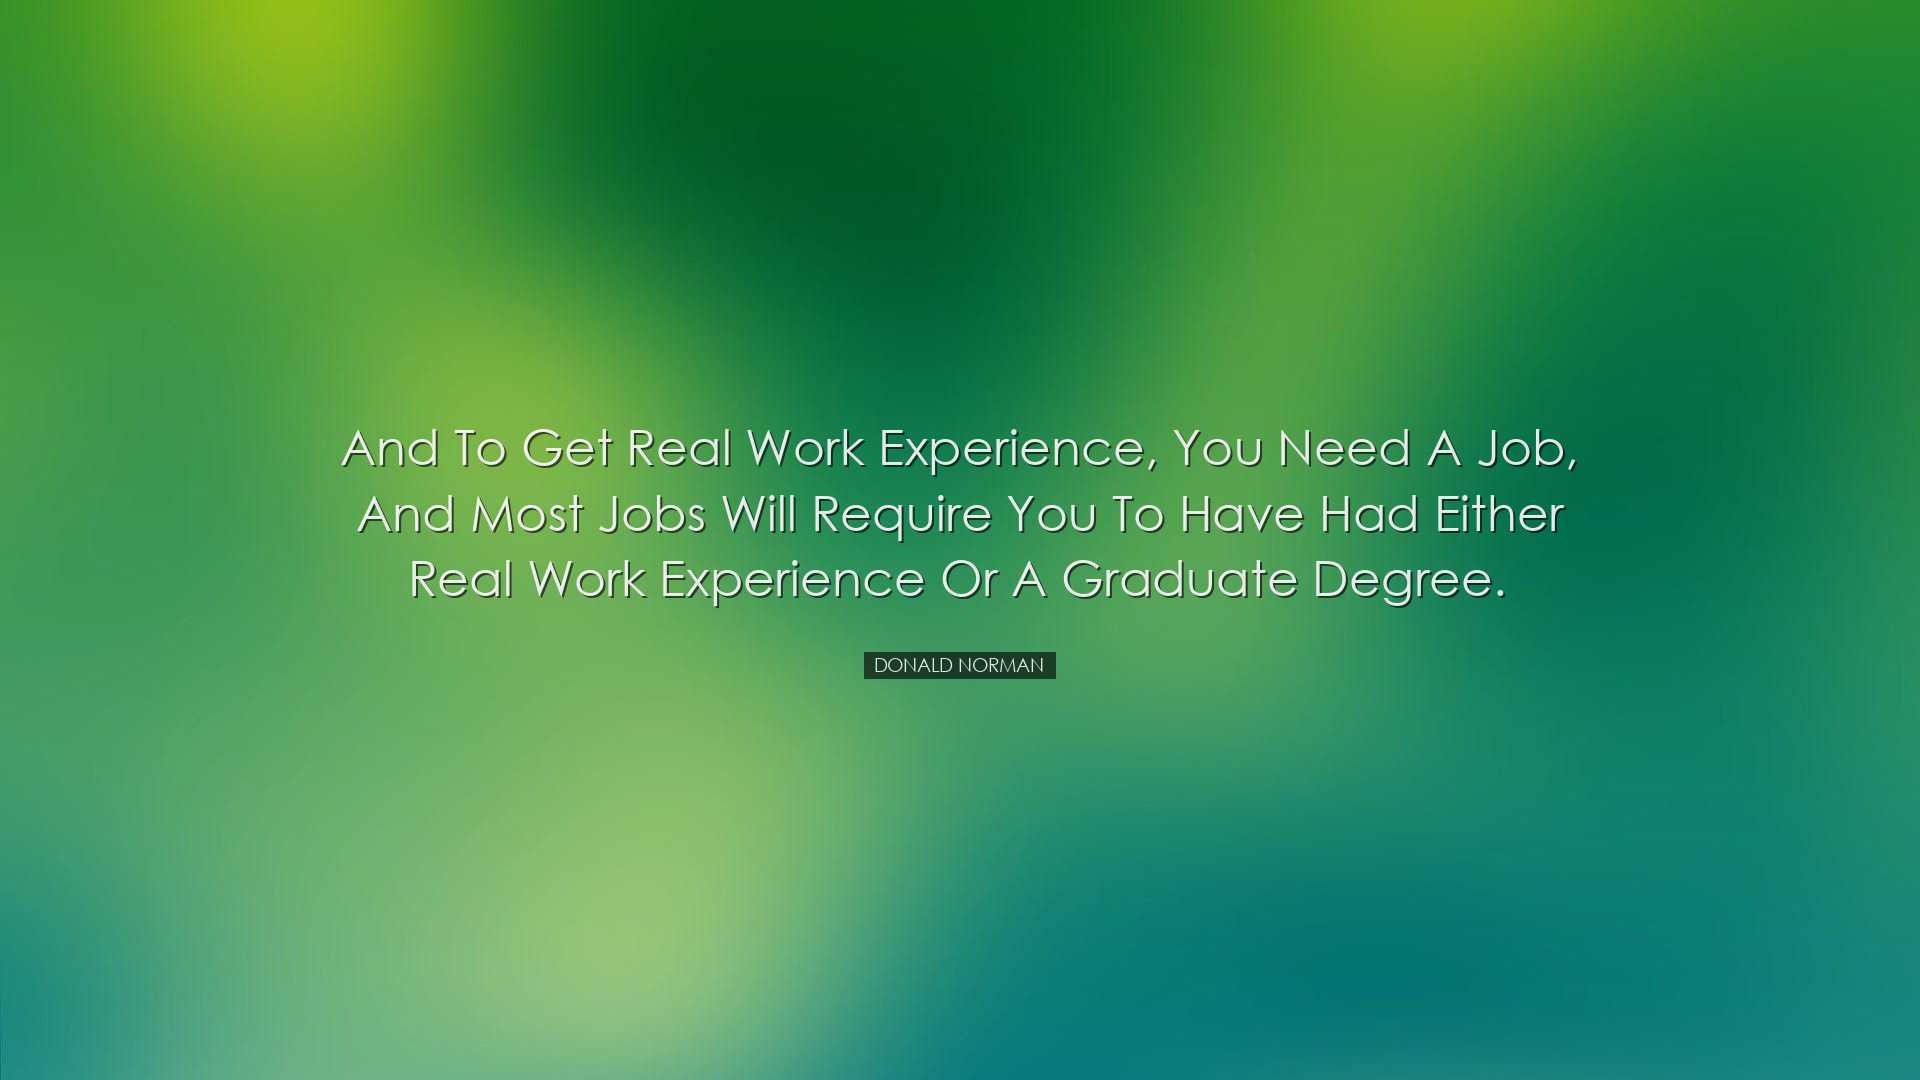 And to get real work experience, you need a job, and most jobs wil